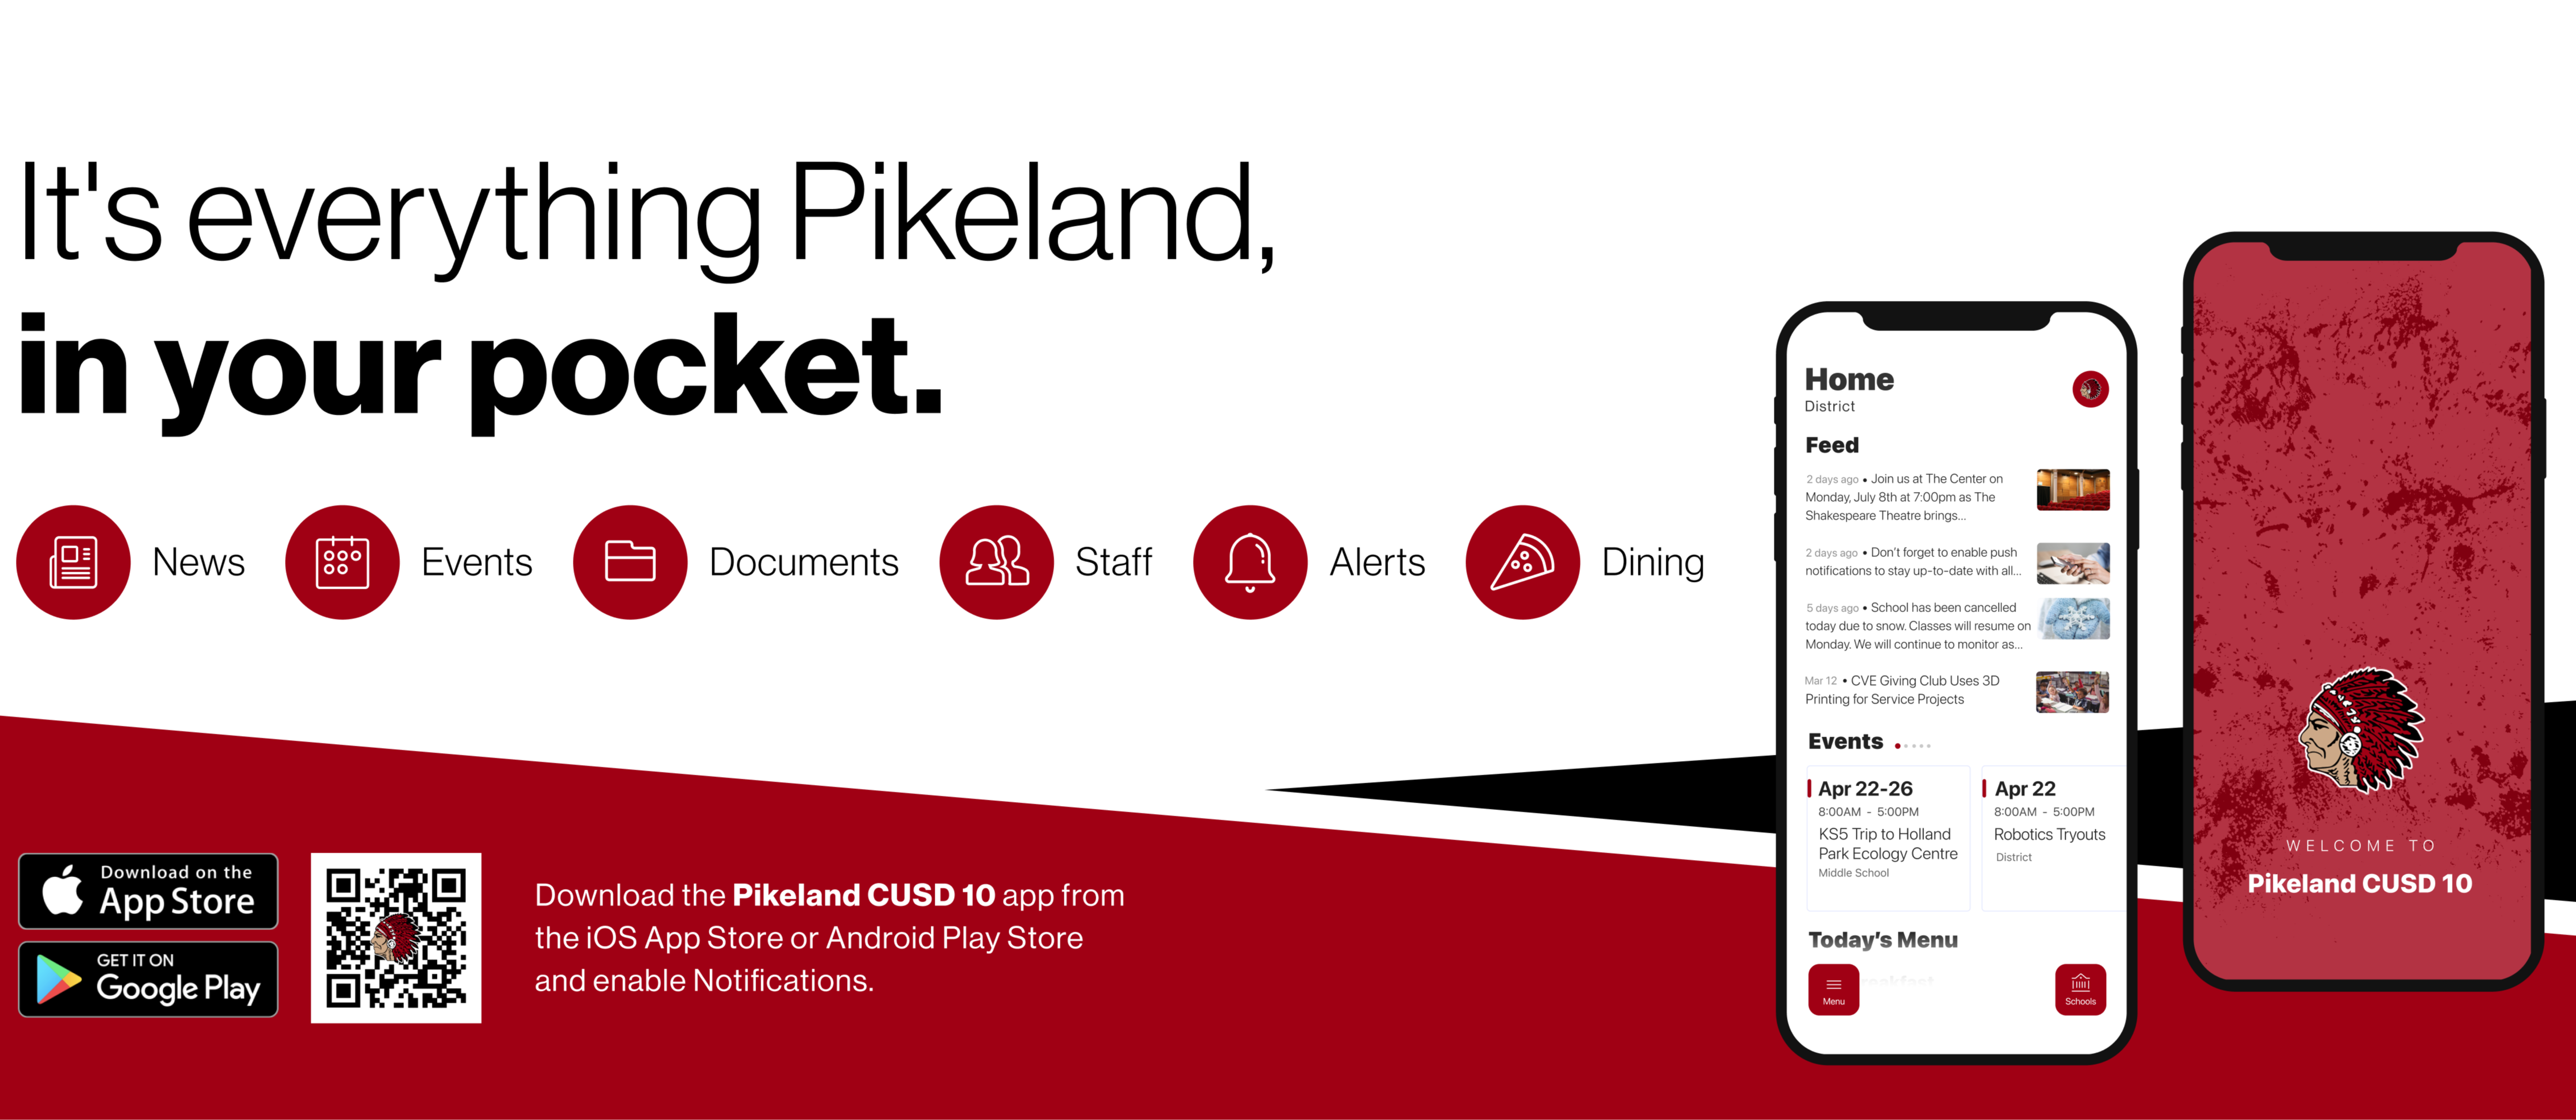 It's everything Pikeland, in your pocket. D= News Events Documents Staff Alerts Downioad on the App Store GET IT ON Google Play Download the Pikeland CUSD 10 app from the iOS App Store or Android Play Store and enable Notifications, Dining Home Feed Events 1 Apr 22-26 KS5 Trip to Holland Park -coloav Centre Todav's